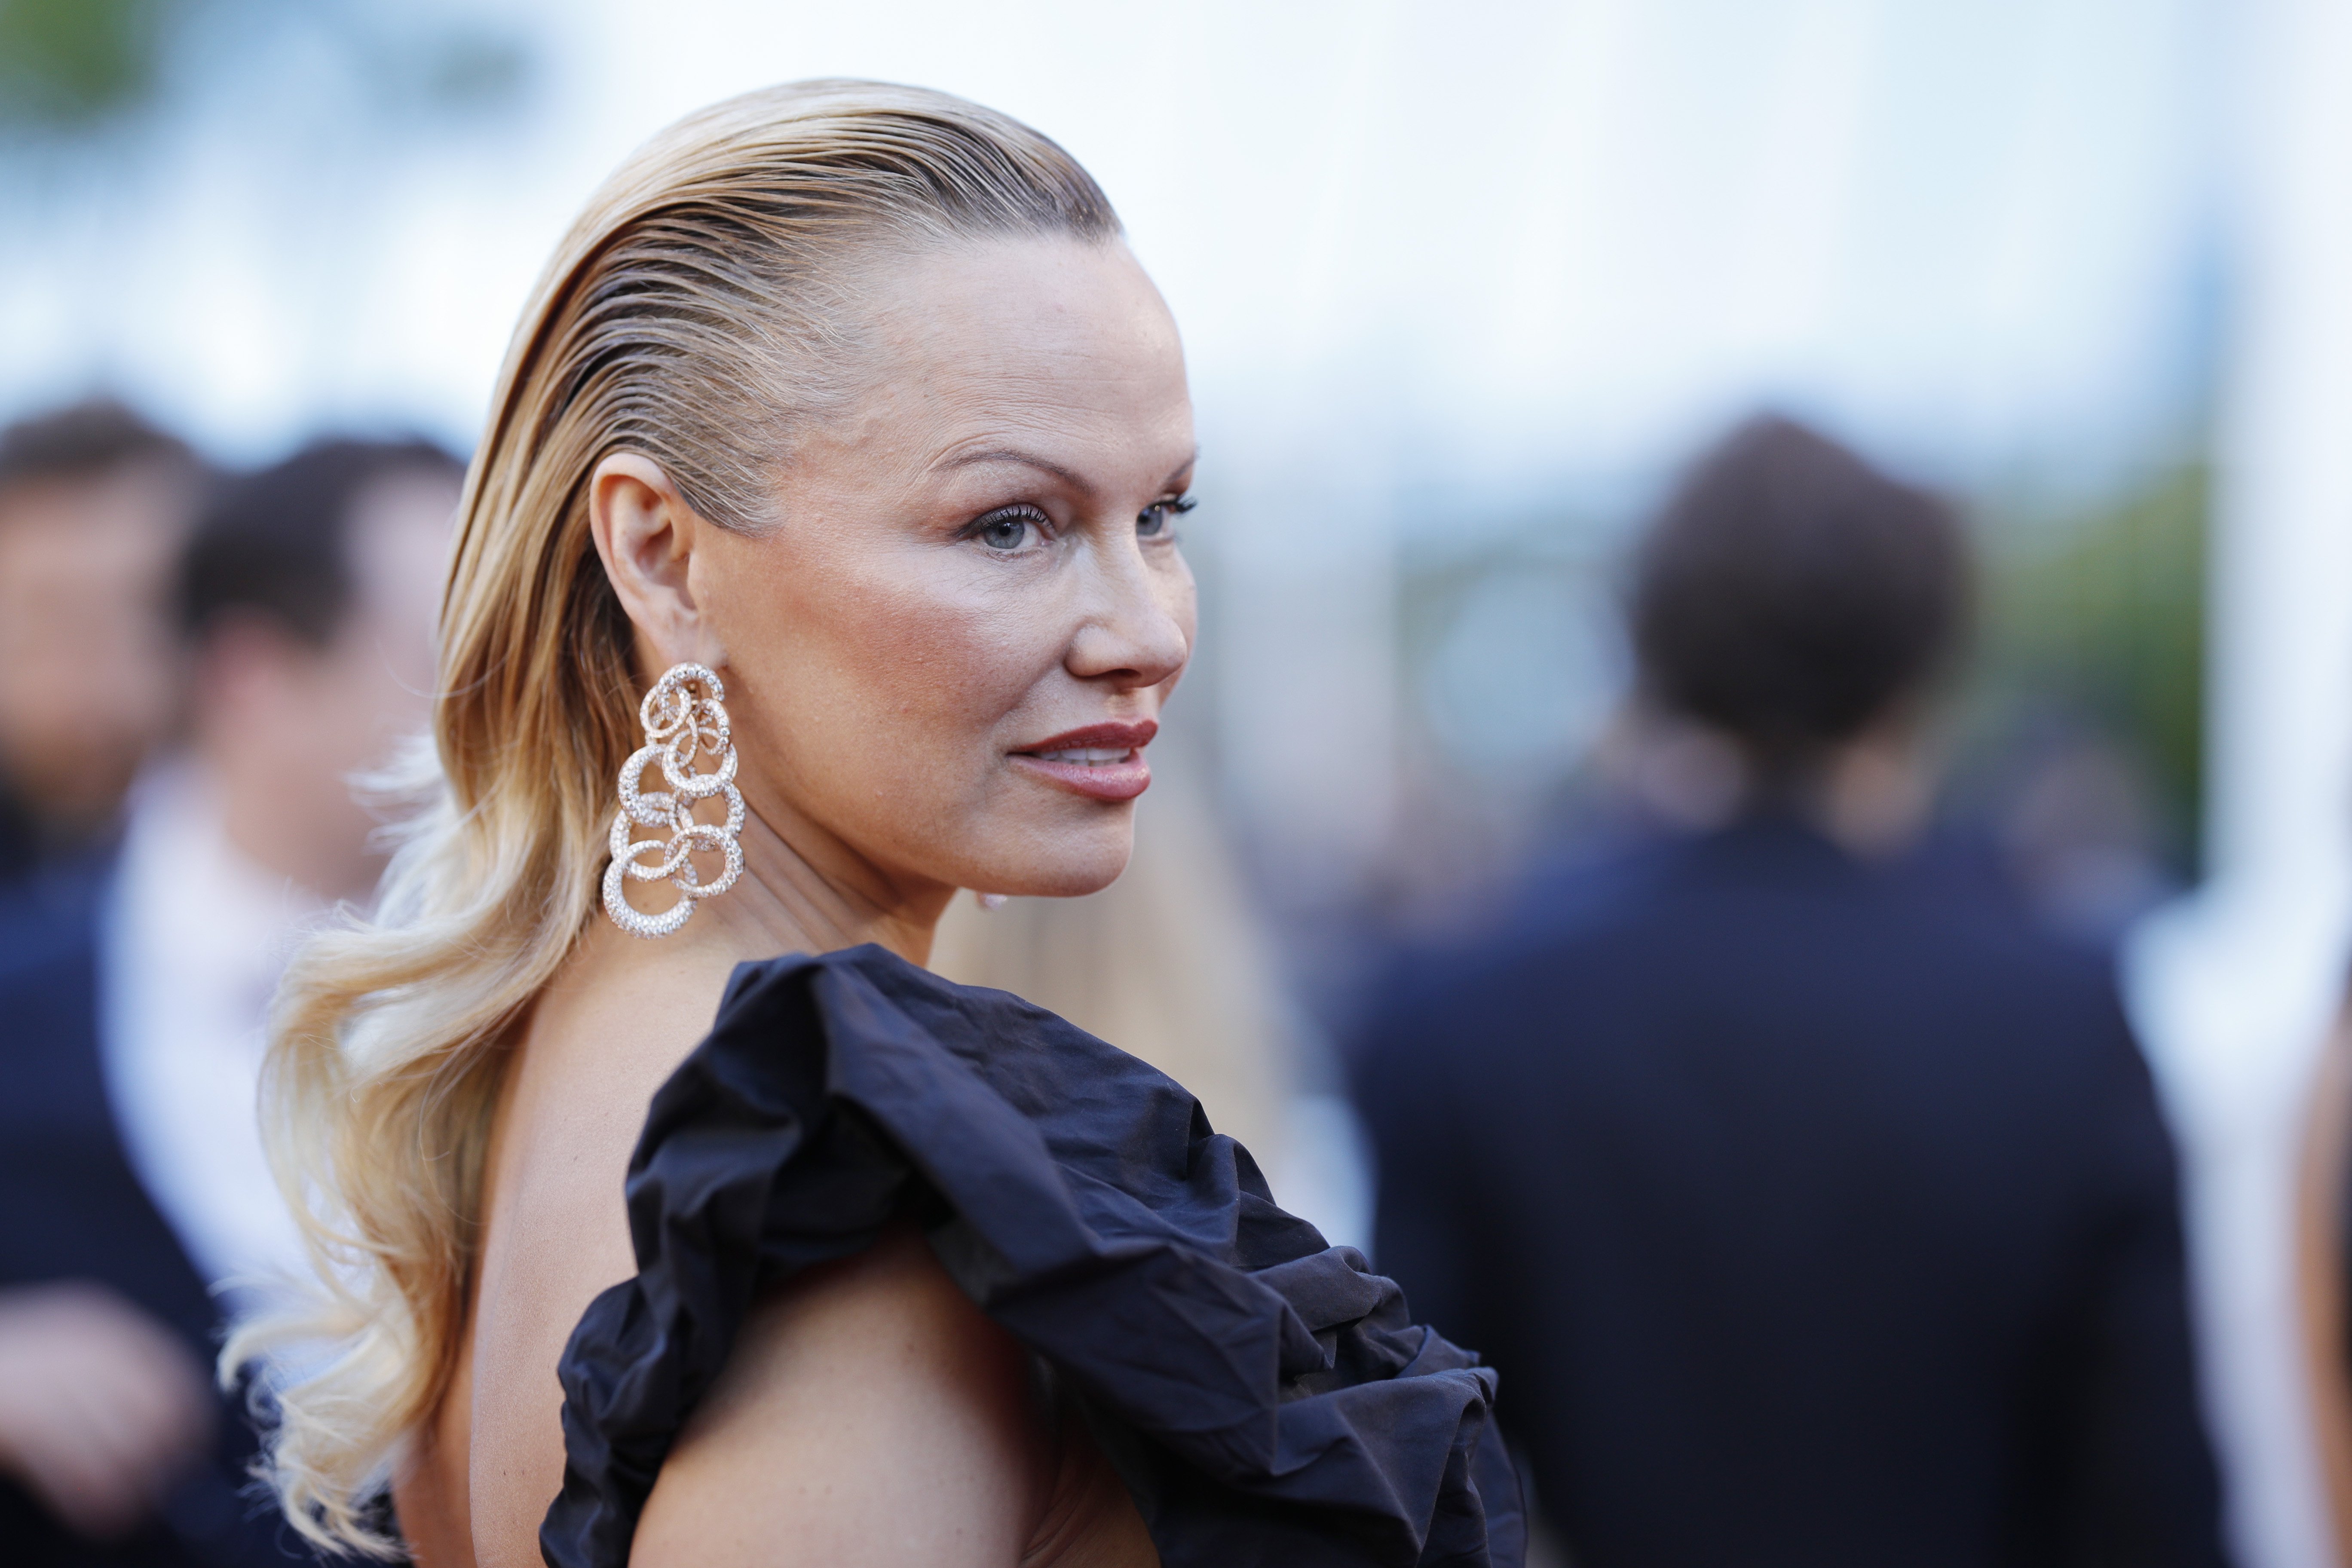 Pamela Anderson at the "120 Beats Per Minute (120 Battements Par Minute)" screening during the 70th annual Cannes Film Festival at Palais des Festivals in Cannes, France | Photo: Getty Images